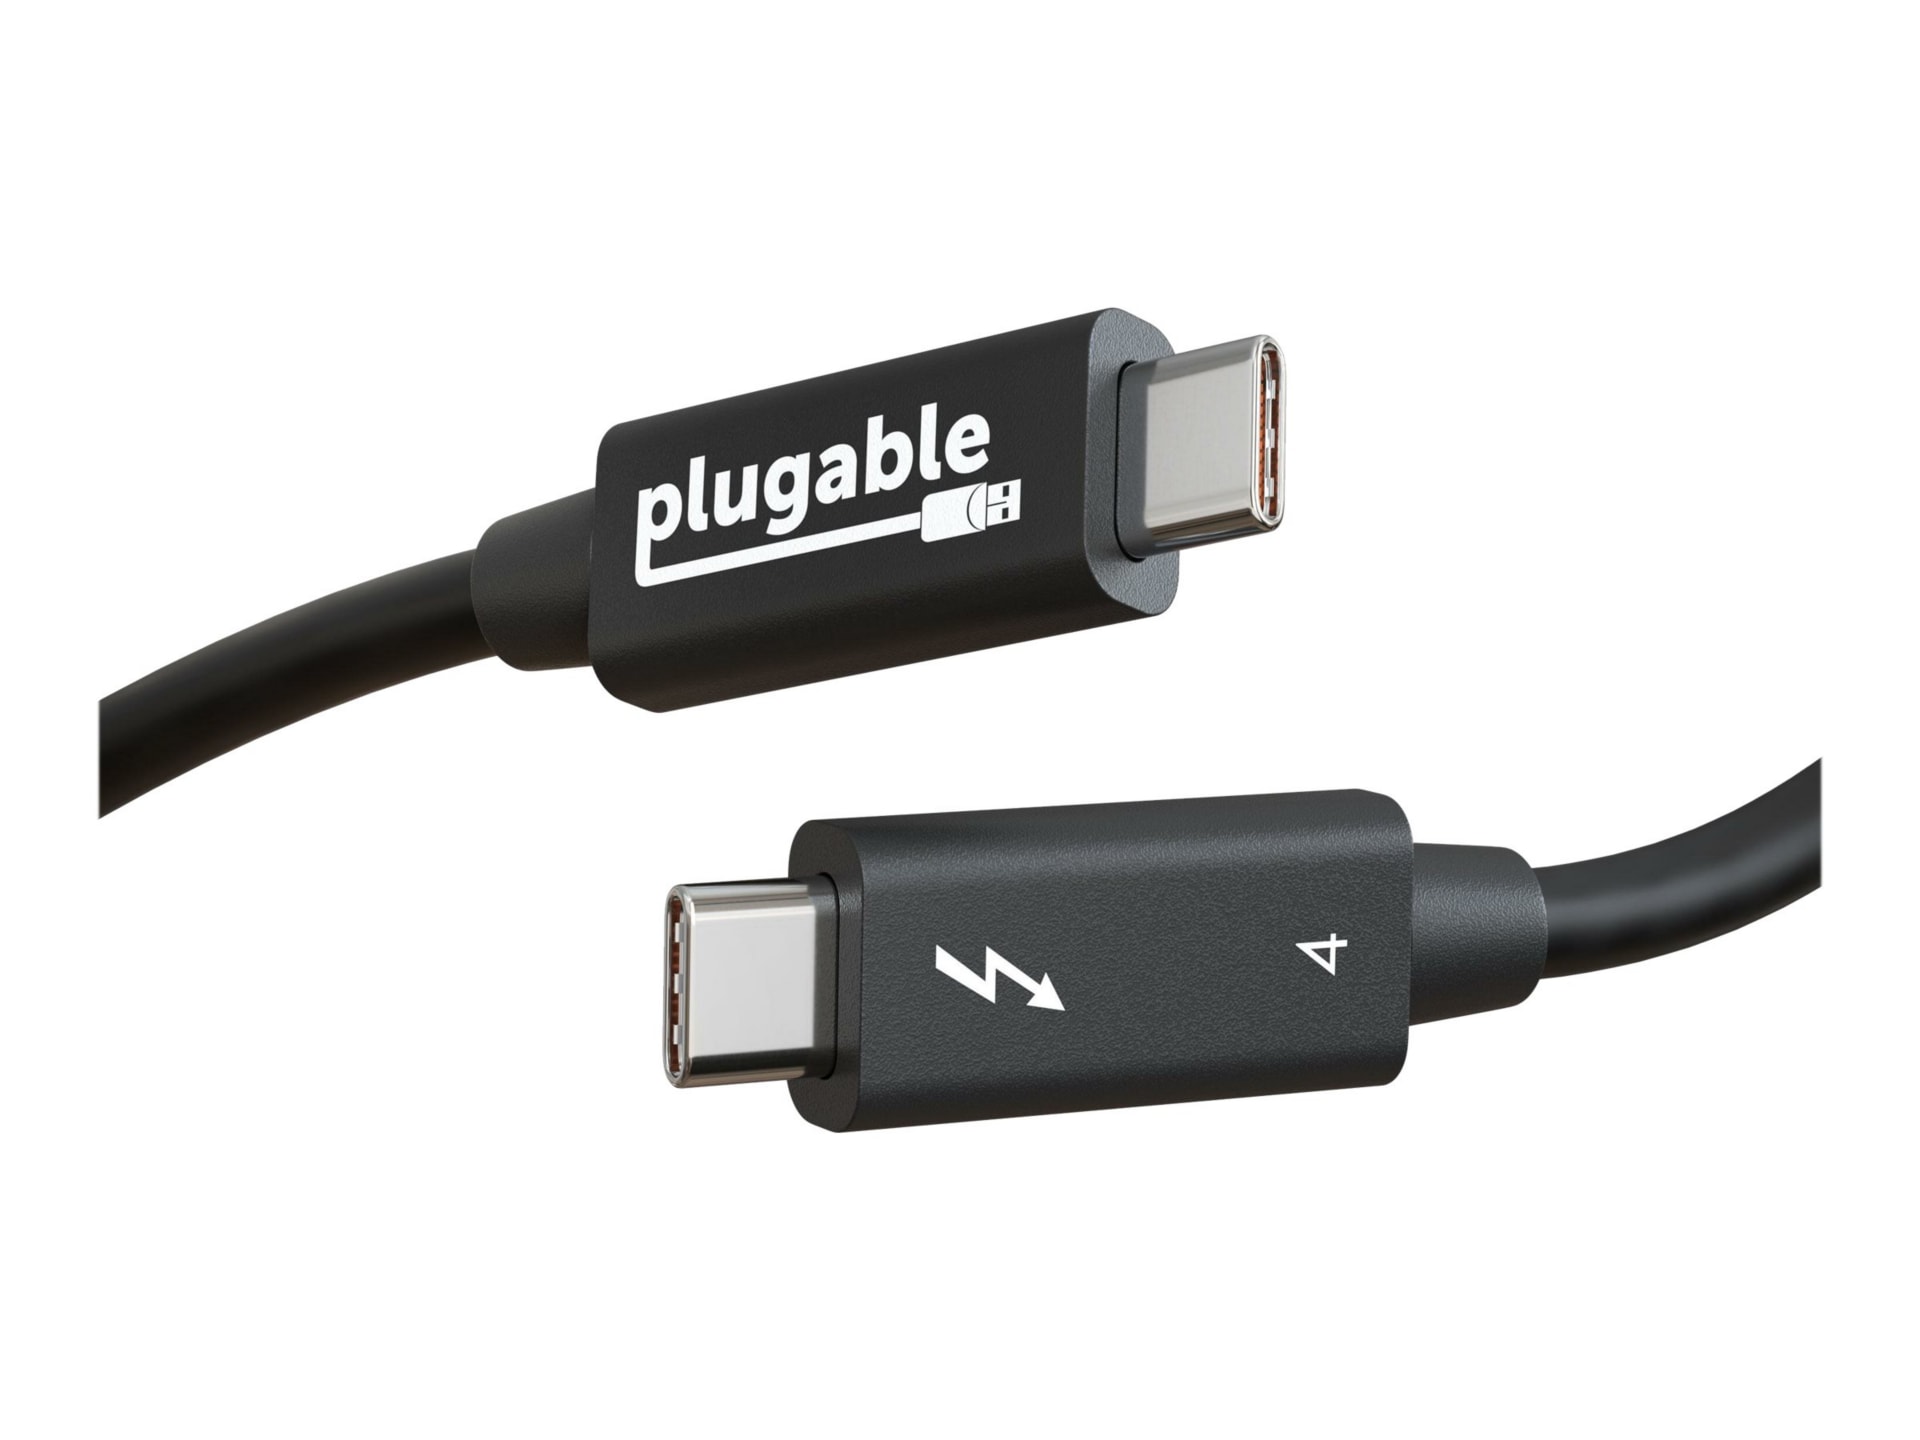 Plugable Plugable Thunderbolt 4 Cable [Thunderbolt Certified]2M/6.6ft